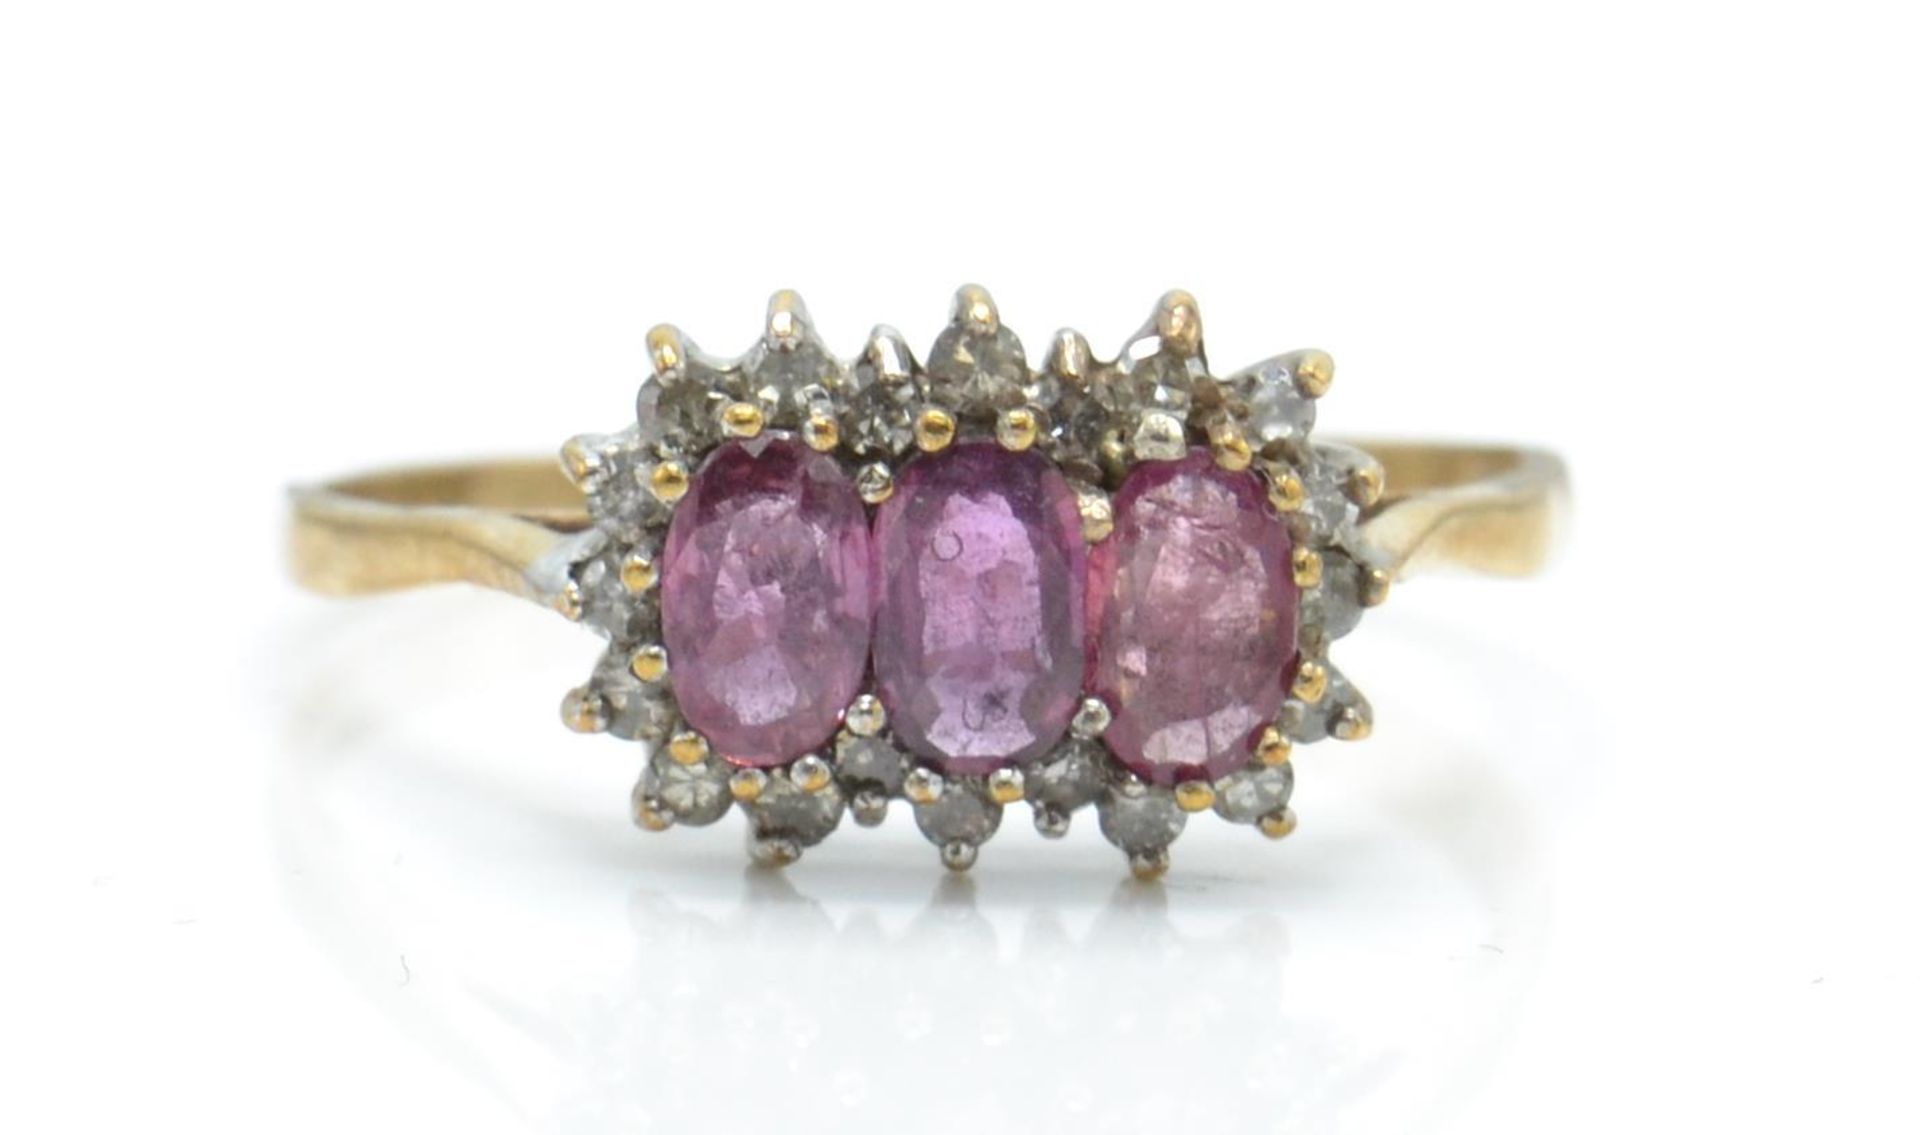 A hallmarked 9ct ruby and diamond ring. The ring set with 3 oval cut rubies surrounded by a halo of